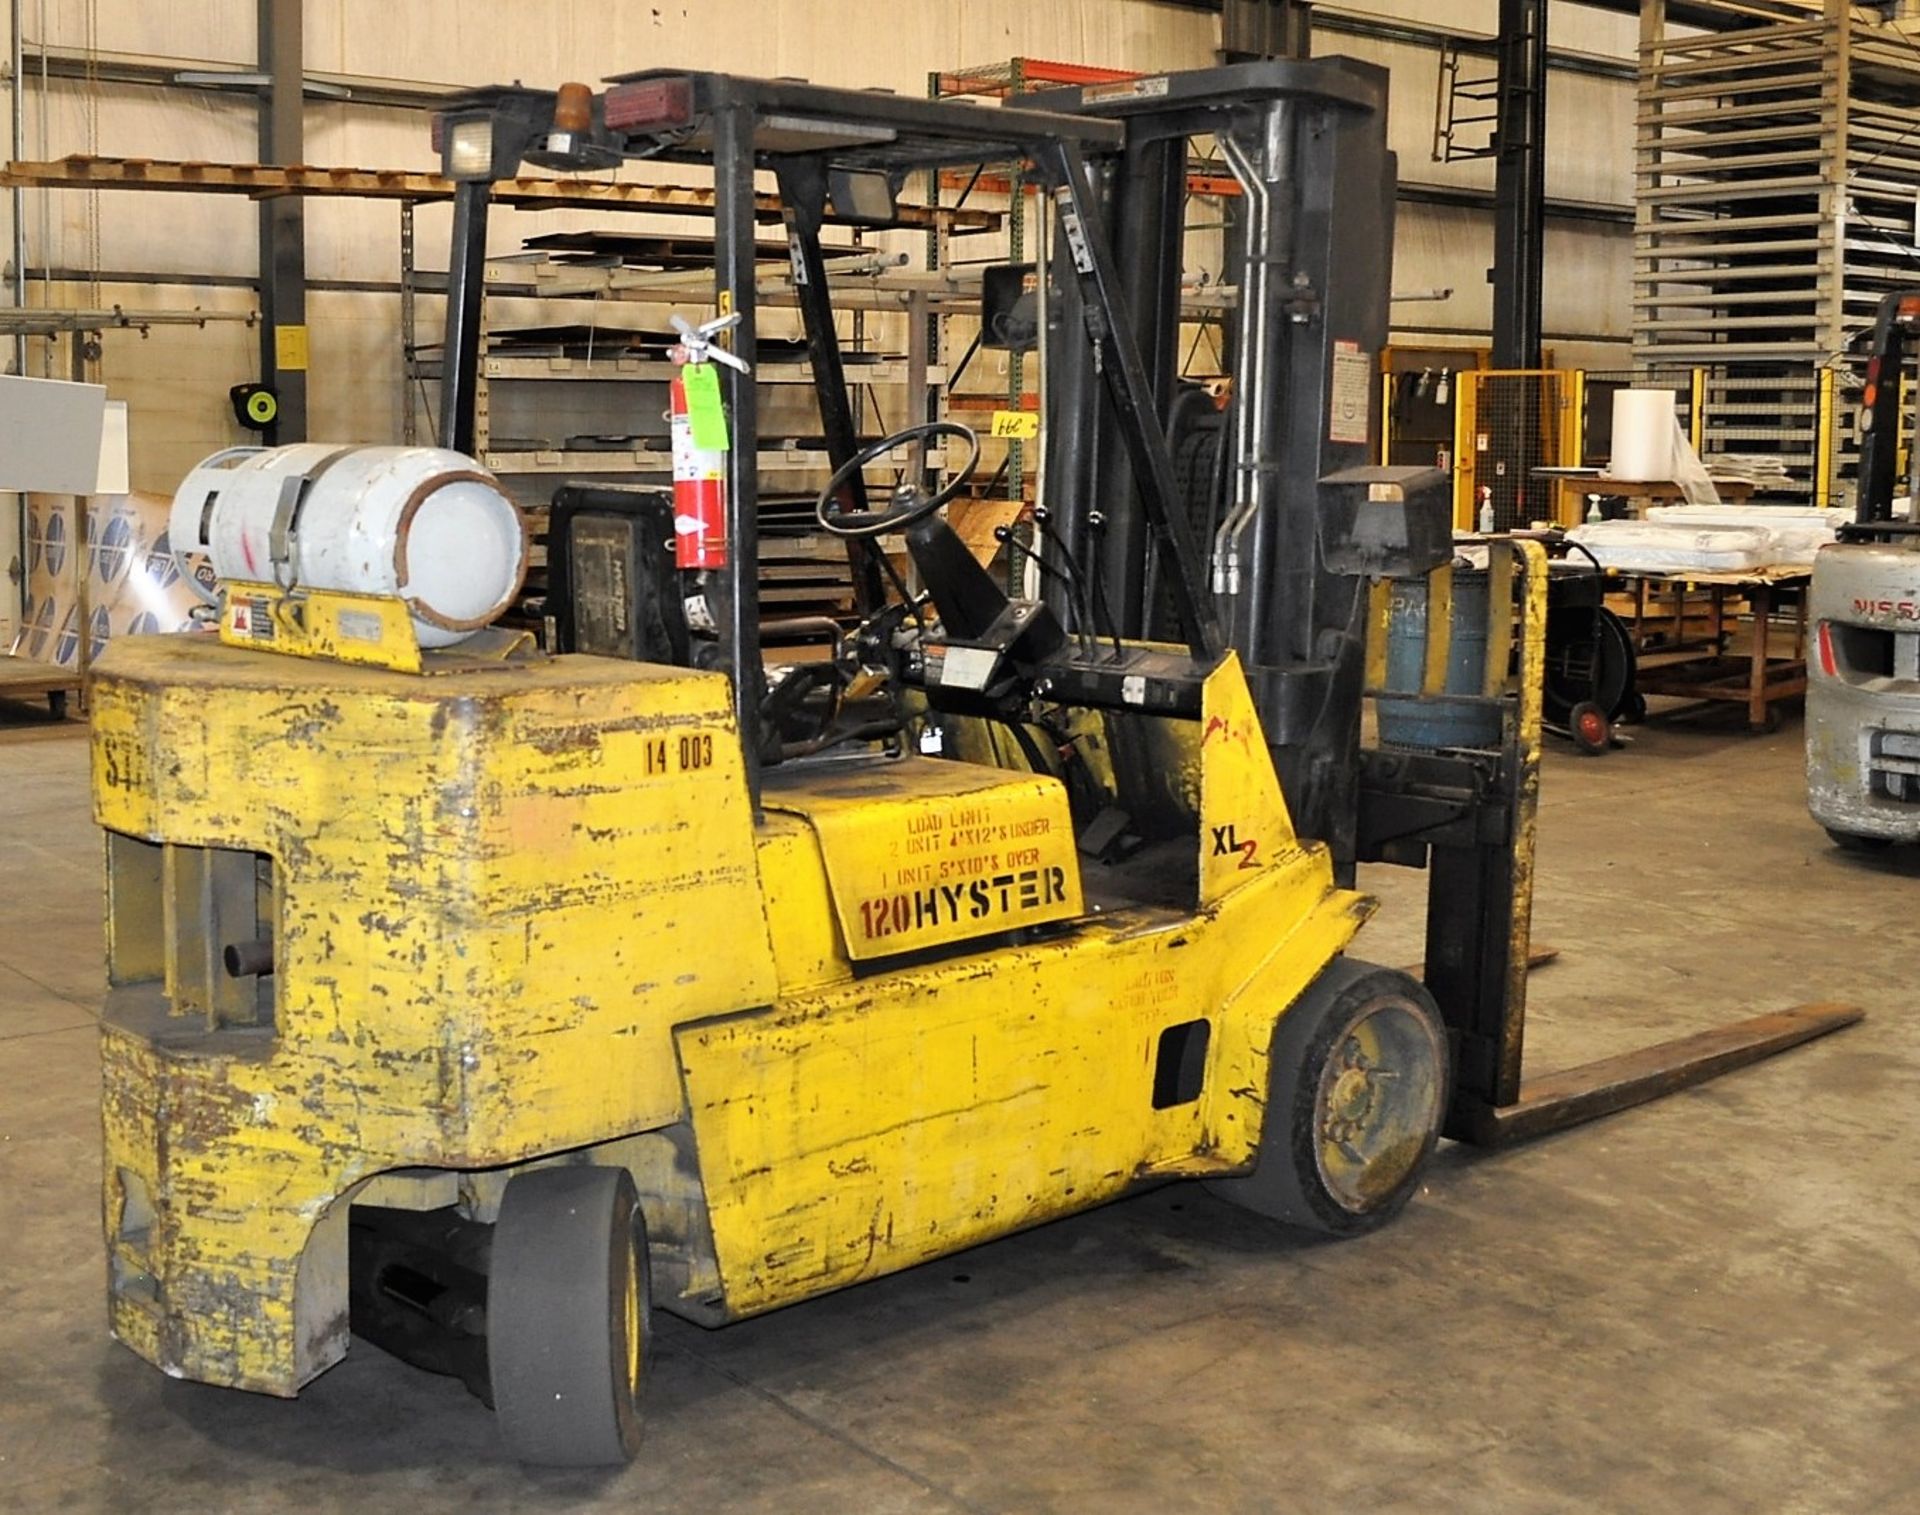 HYSTER MDL. S120XLS 11,700# CAPACITY PROPANE FORKLIFT TRUCK, WITH 184" LIFT, SOLID TIRES, SIDE - Image 3 of 5